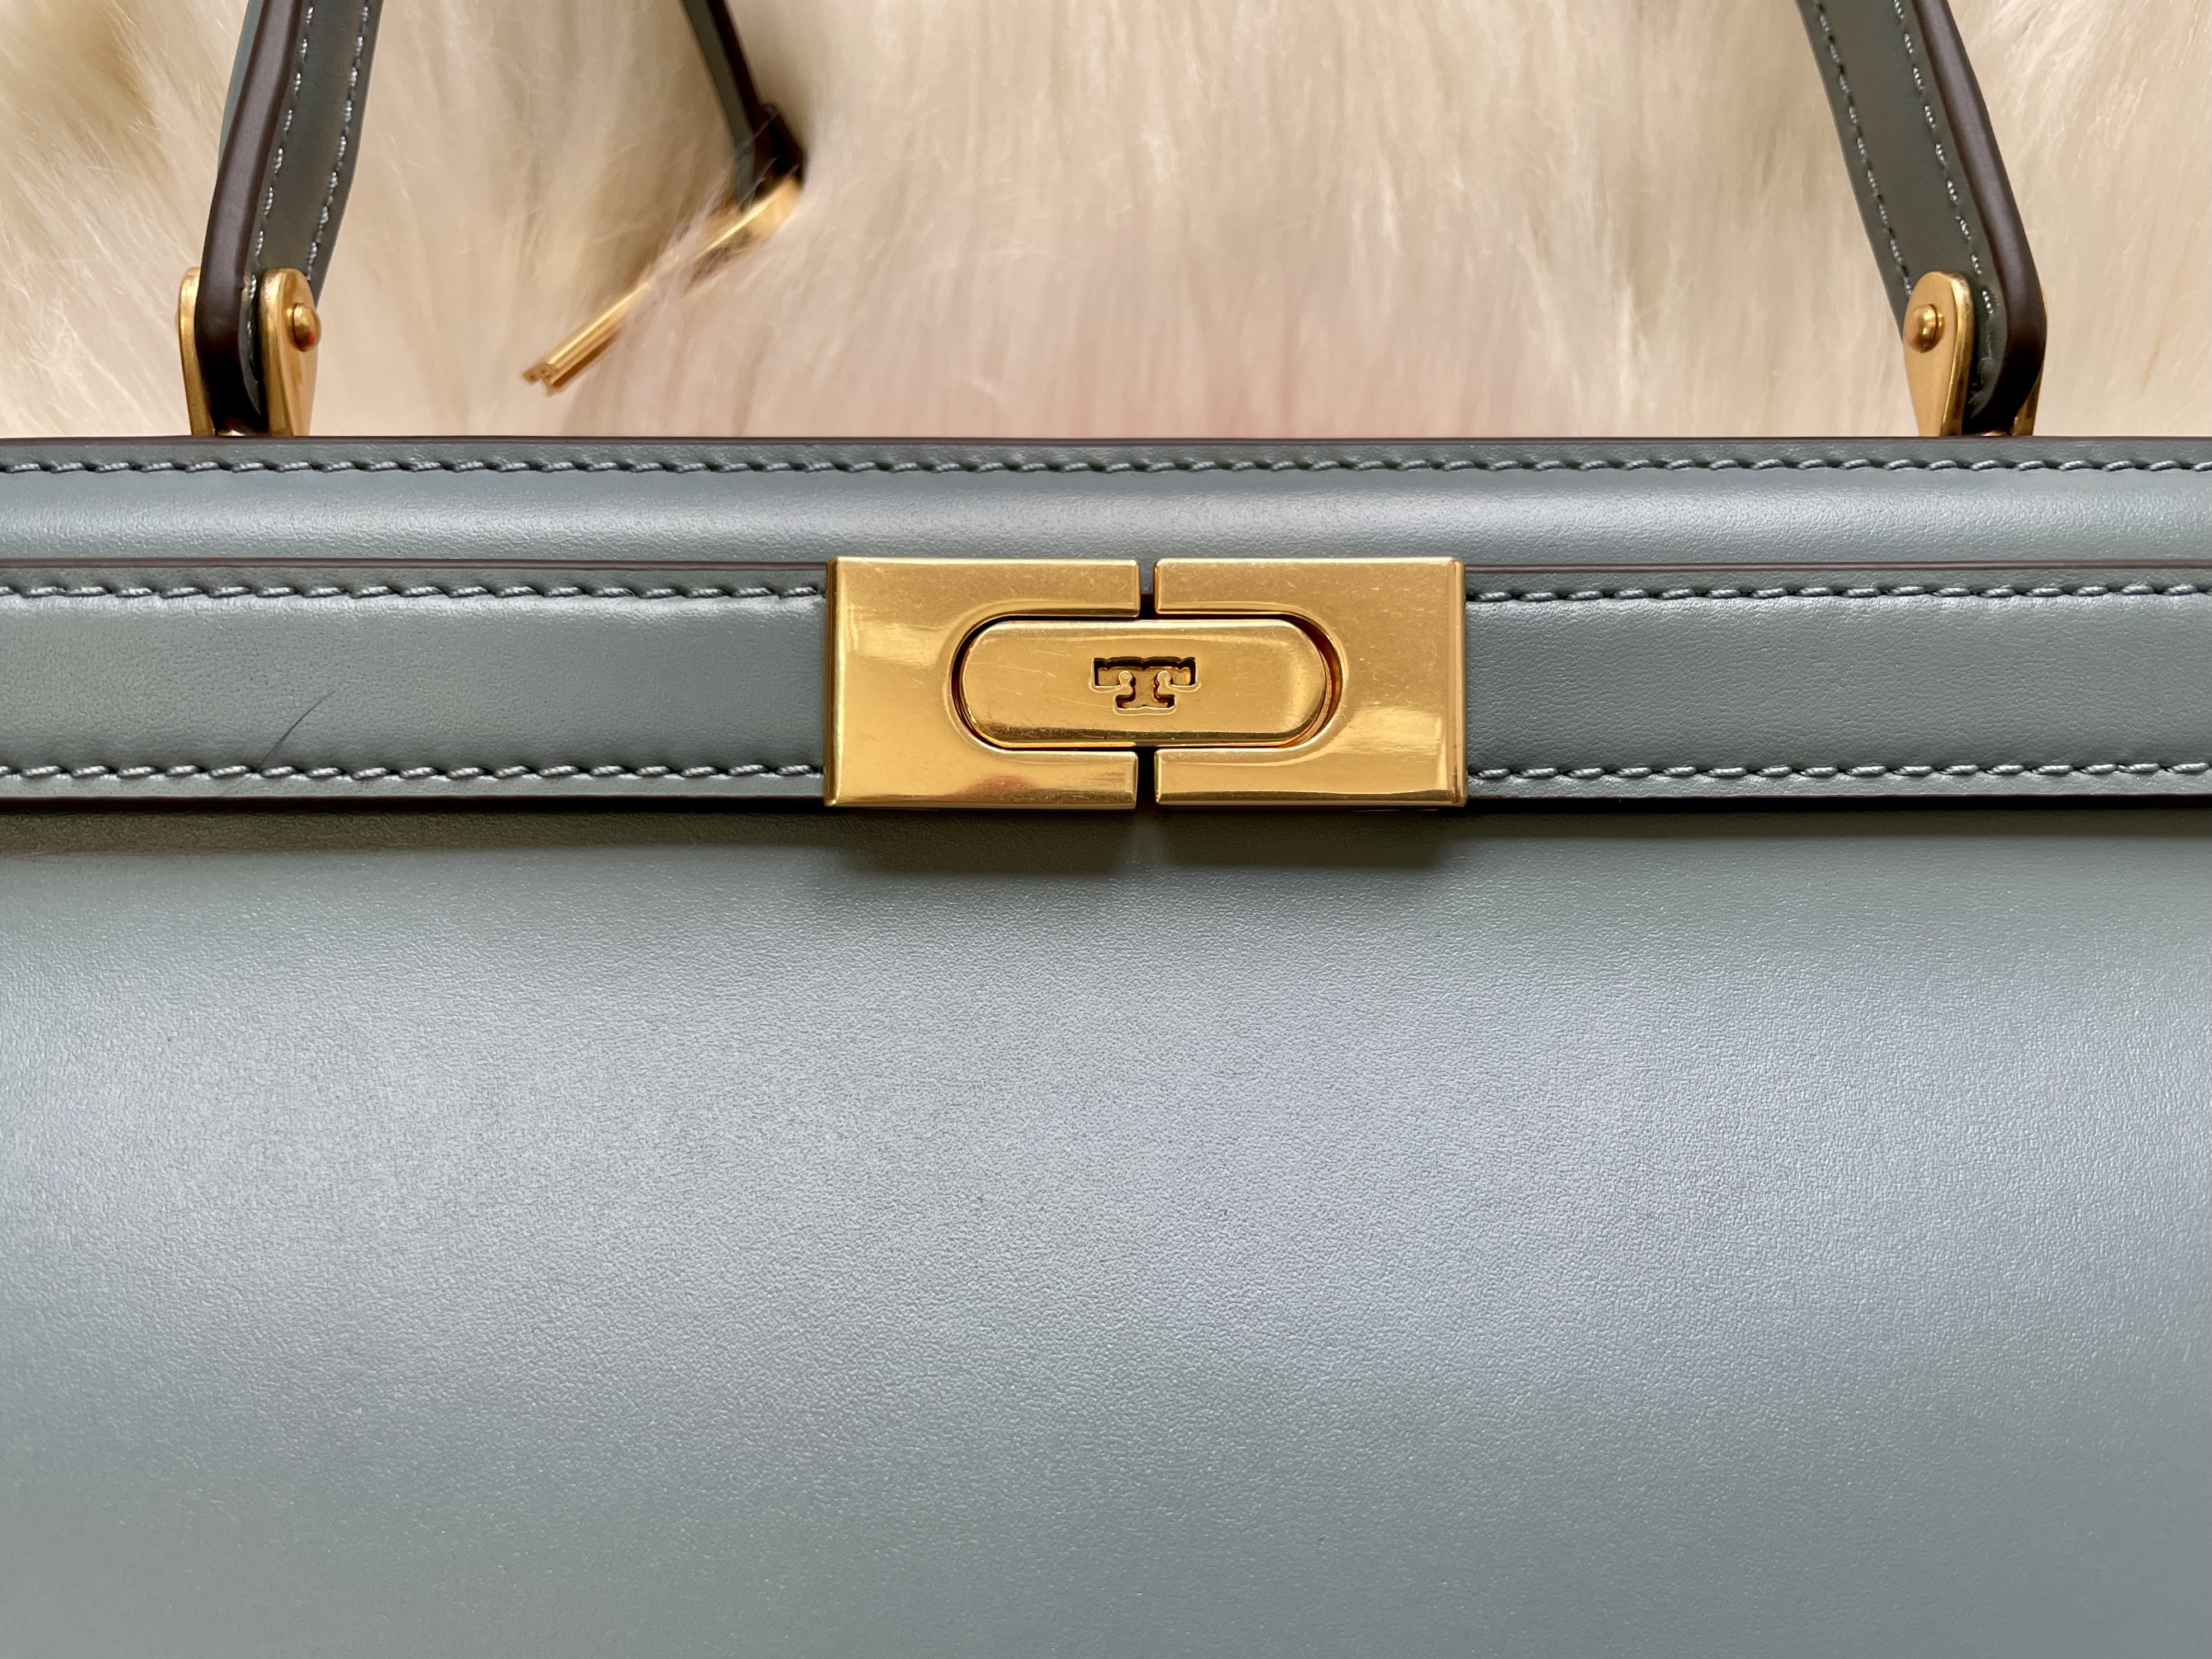 Review: Tory Burch Small Lee Radziwill Leather Bag - Elle Blogs